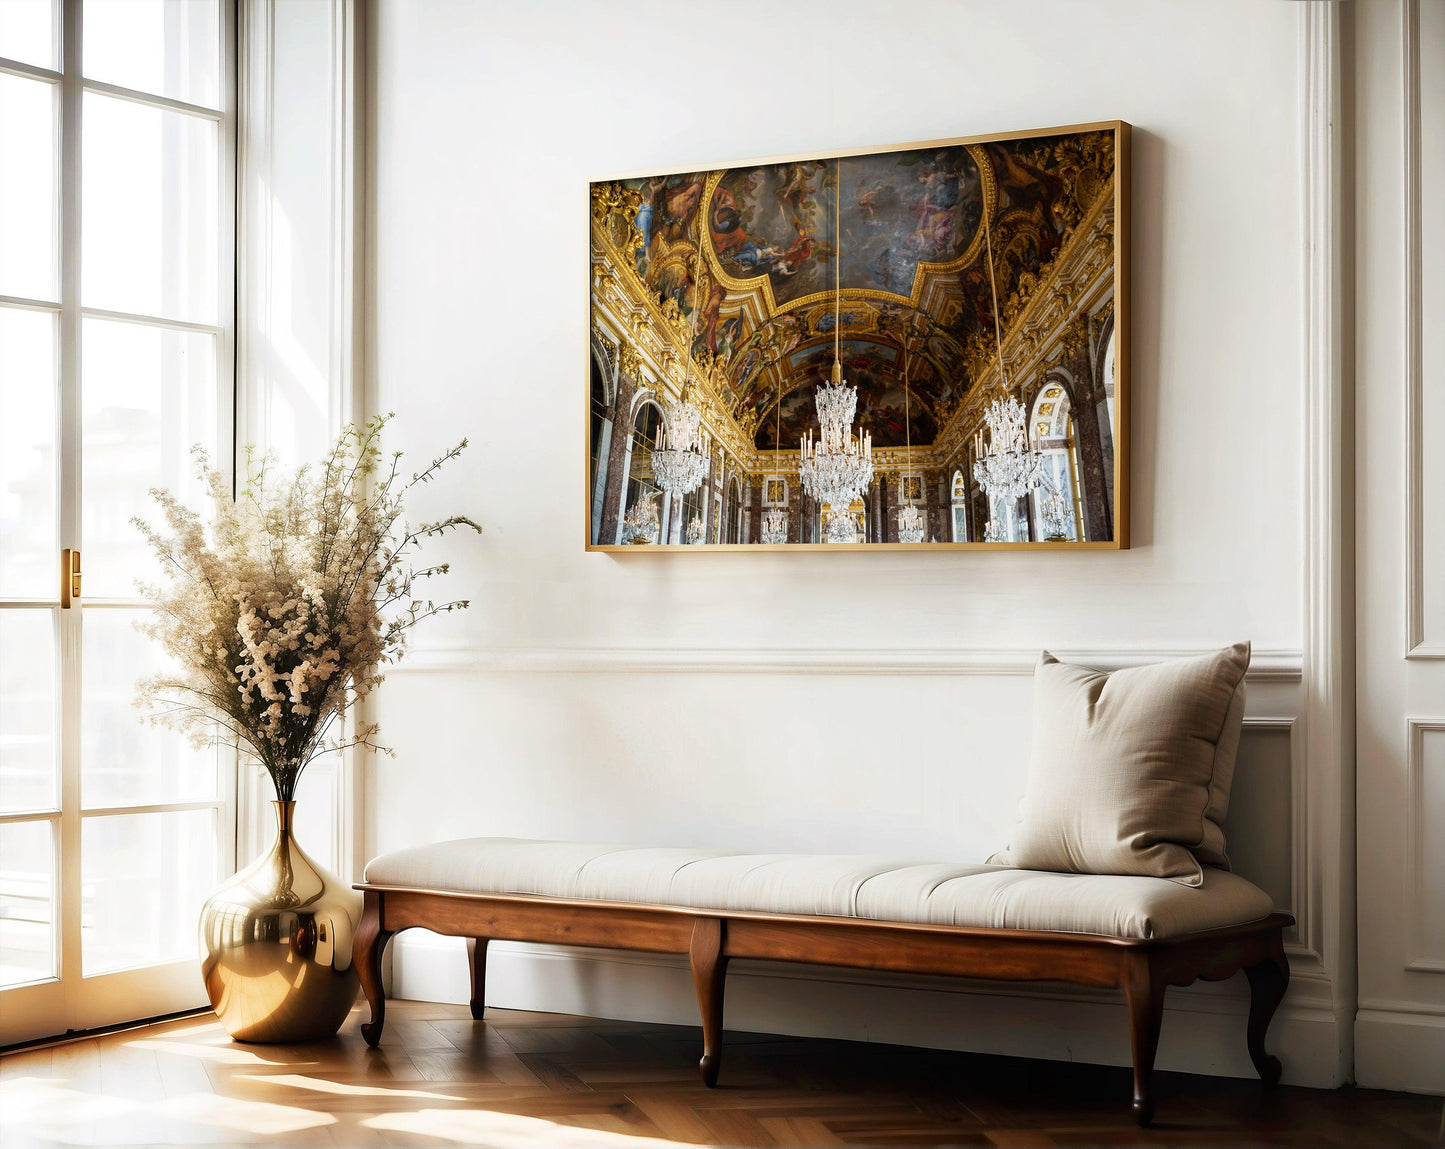 Palace of Versailles Hall of Mirrors Gold Chandelier Photography Print III - Departures Print Shop